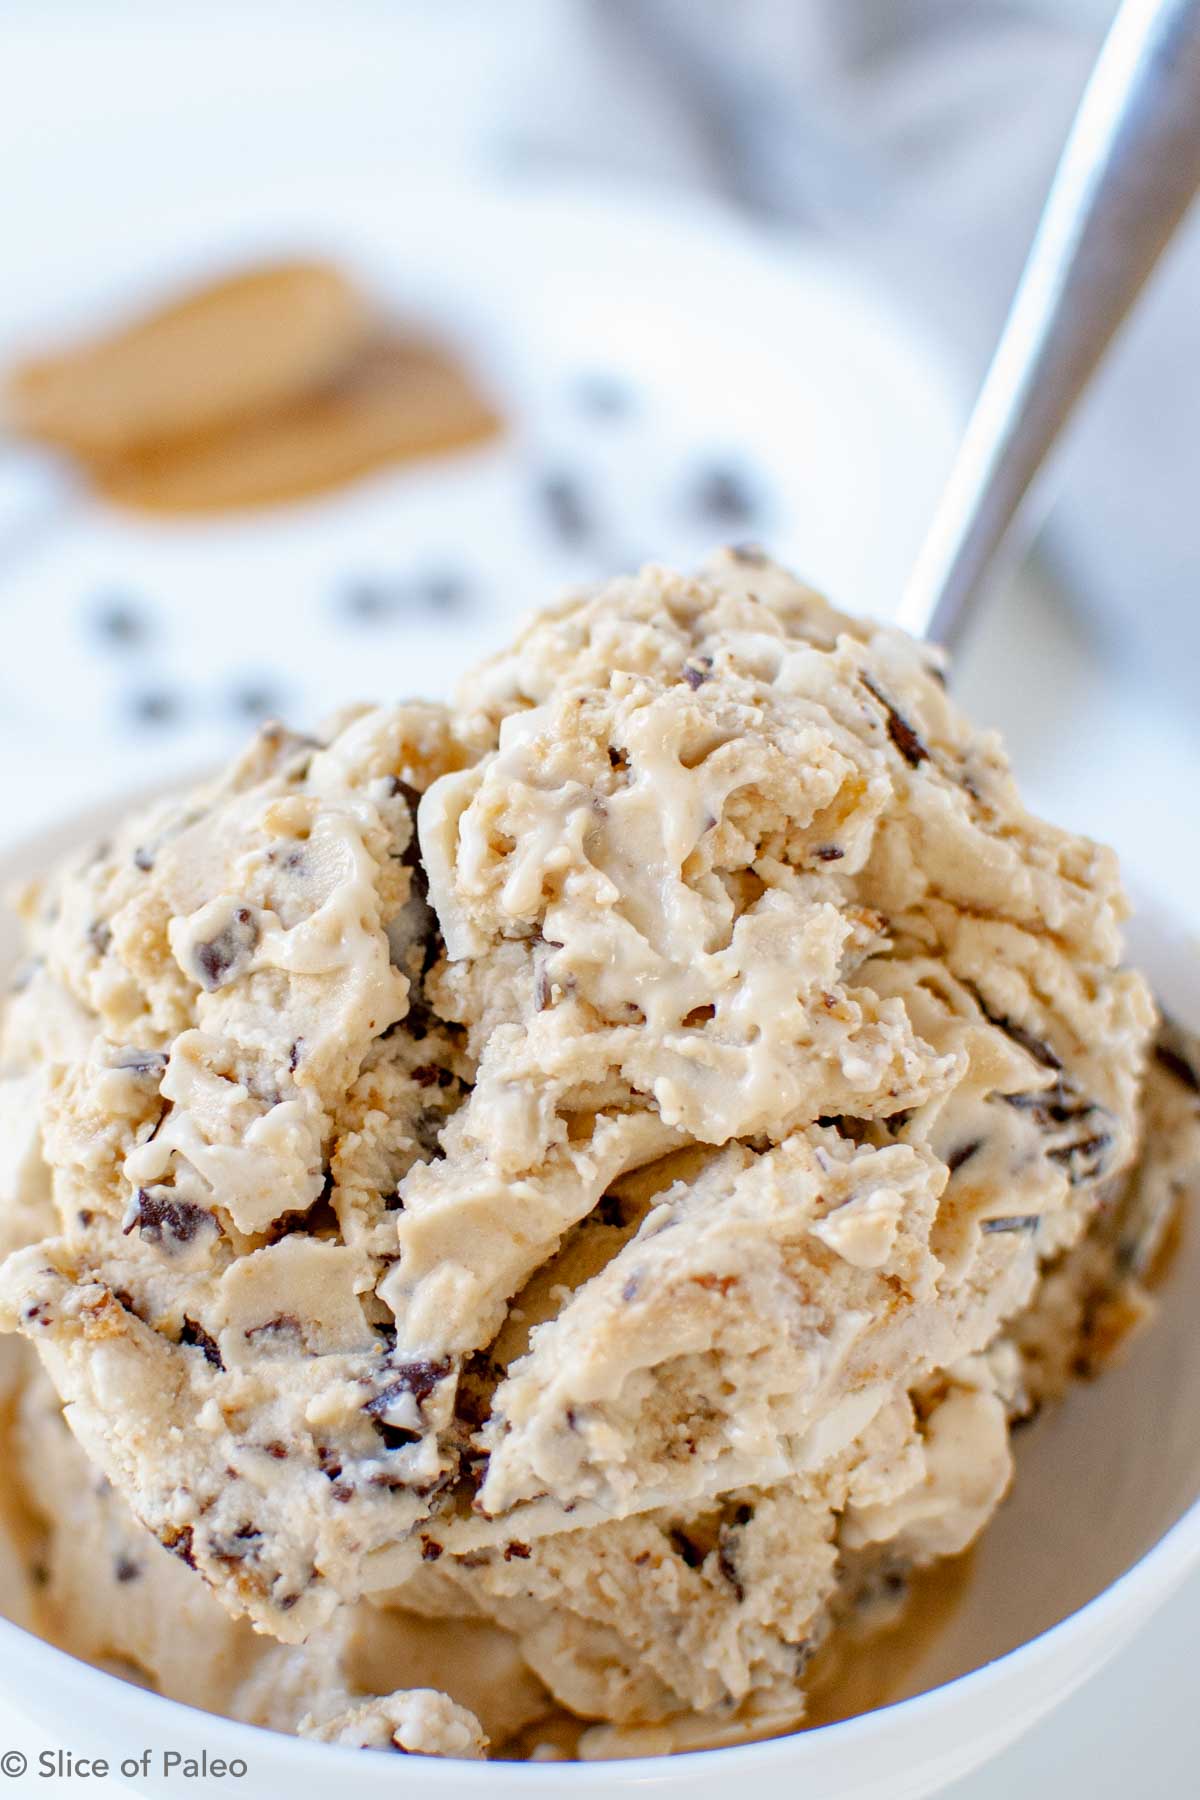 Dairy free peanut butter chocolate swirl ice cream served in a dish